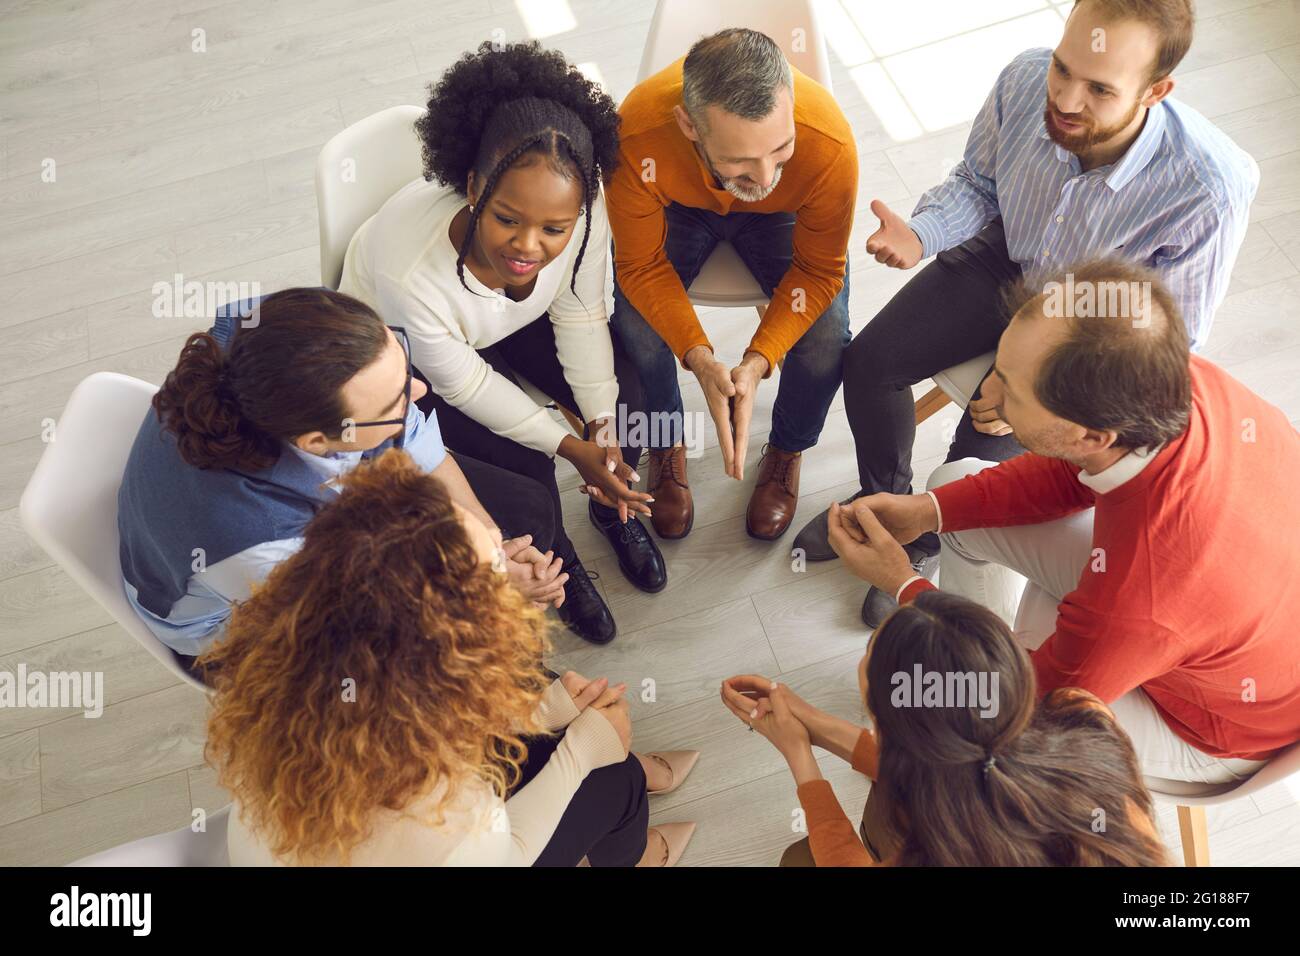 Diverse patients talking in friendly positive atmosphere of group therapy session Stock Photo